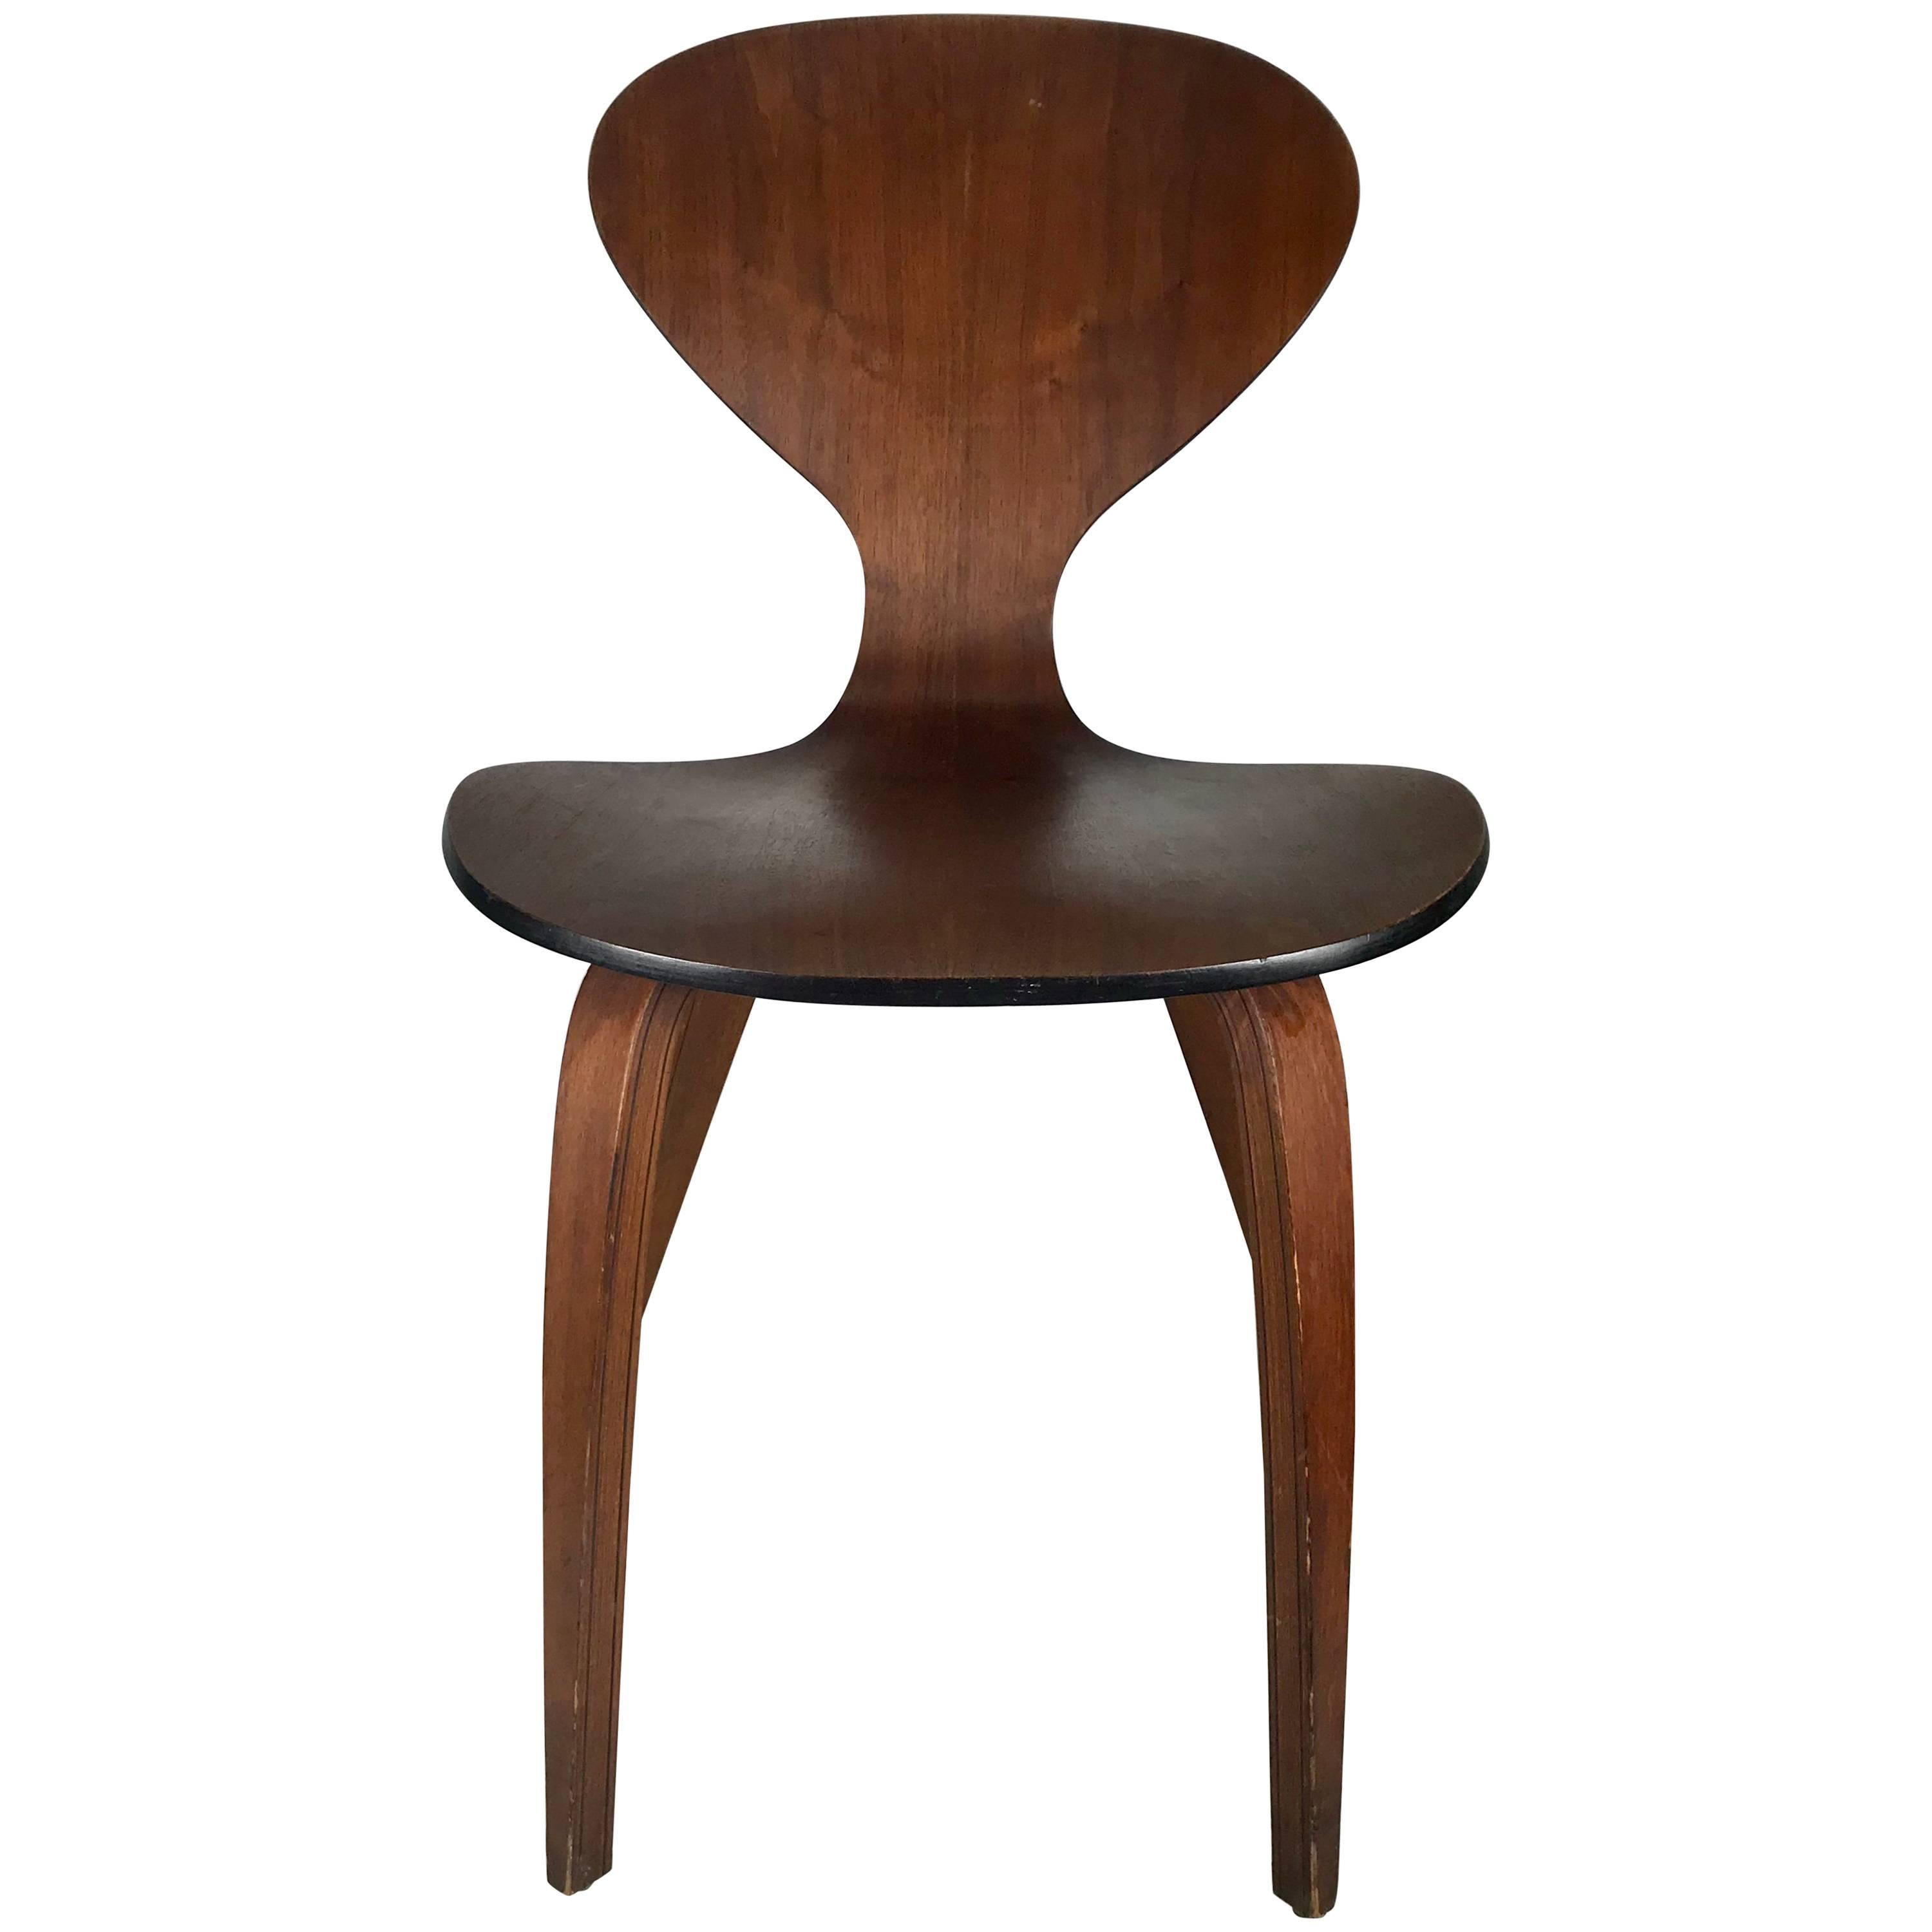 Classic Mid-Century Modern Plywood Chair by Norman Cherner for Plycraft